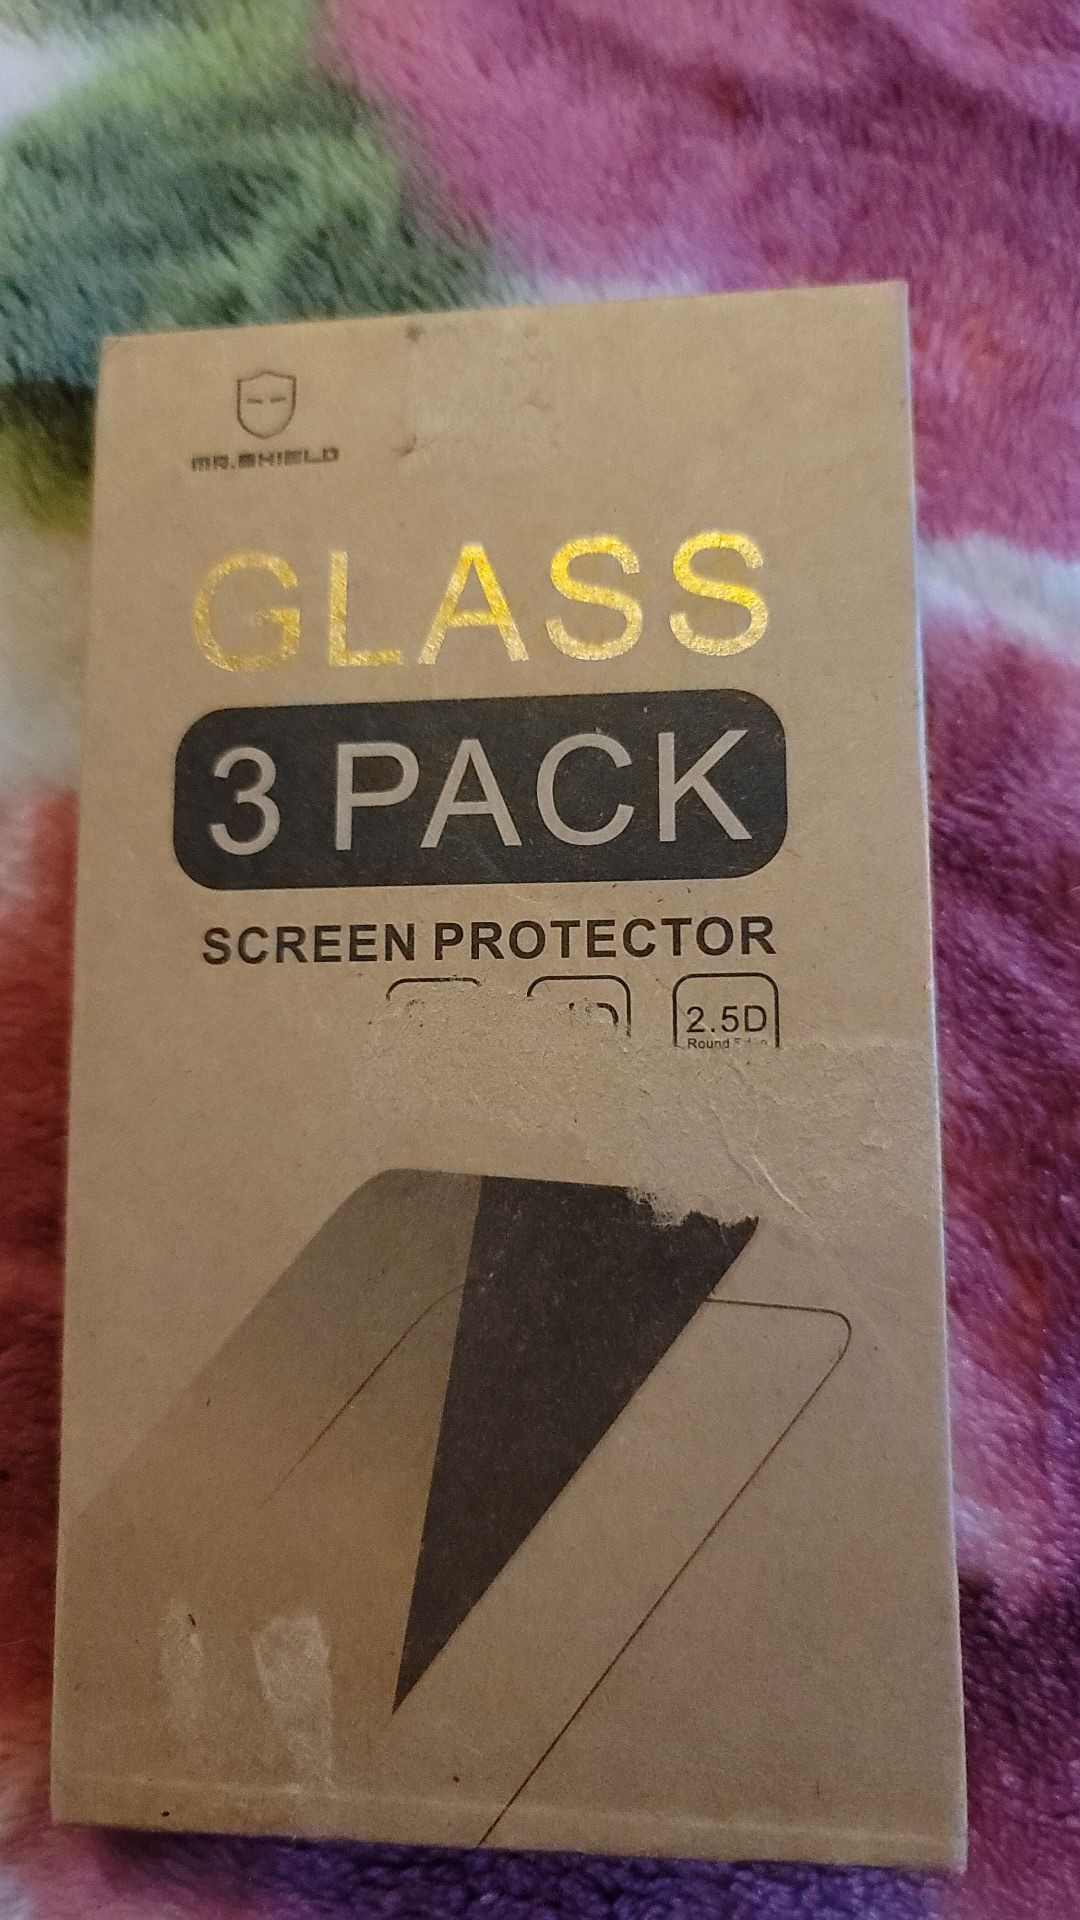 Screen protector for Iphone 5/6